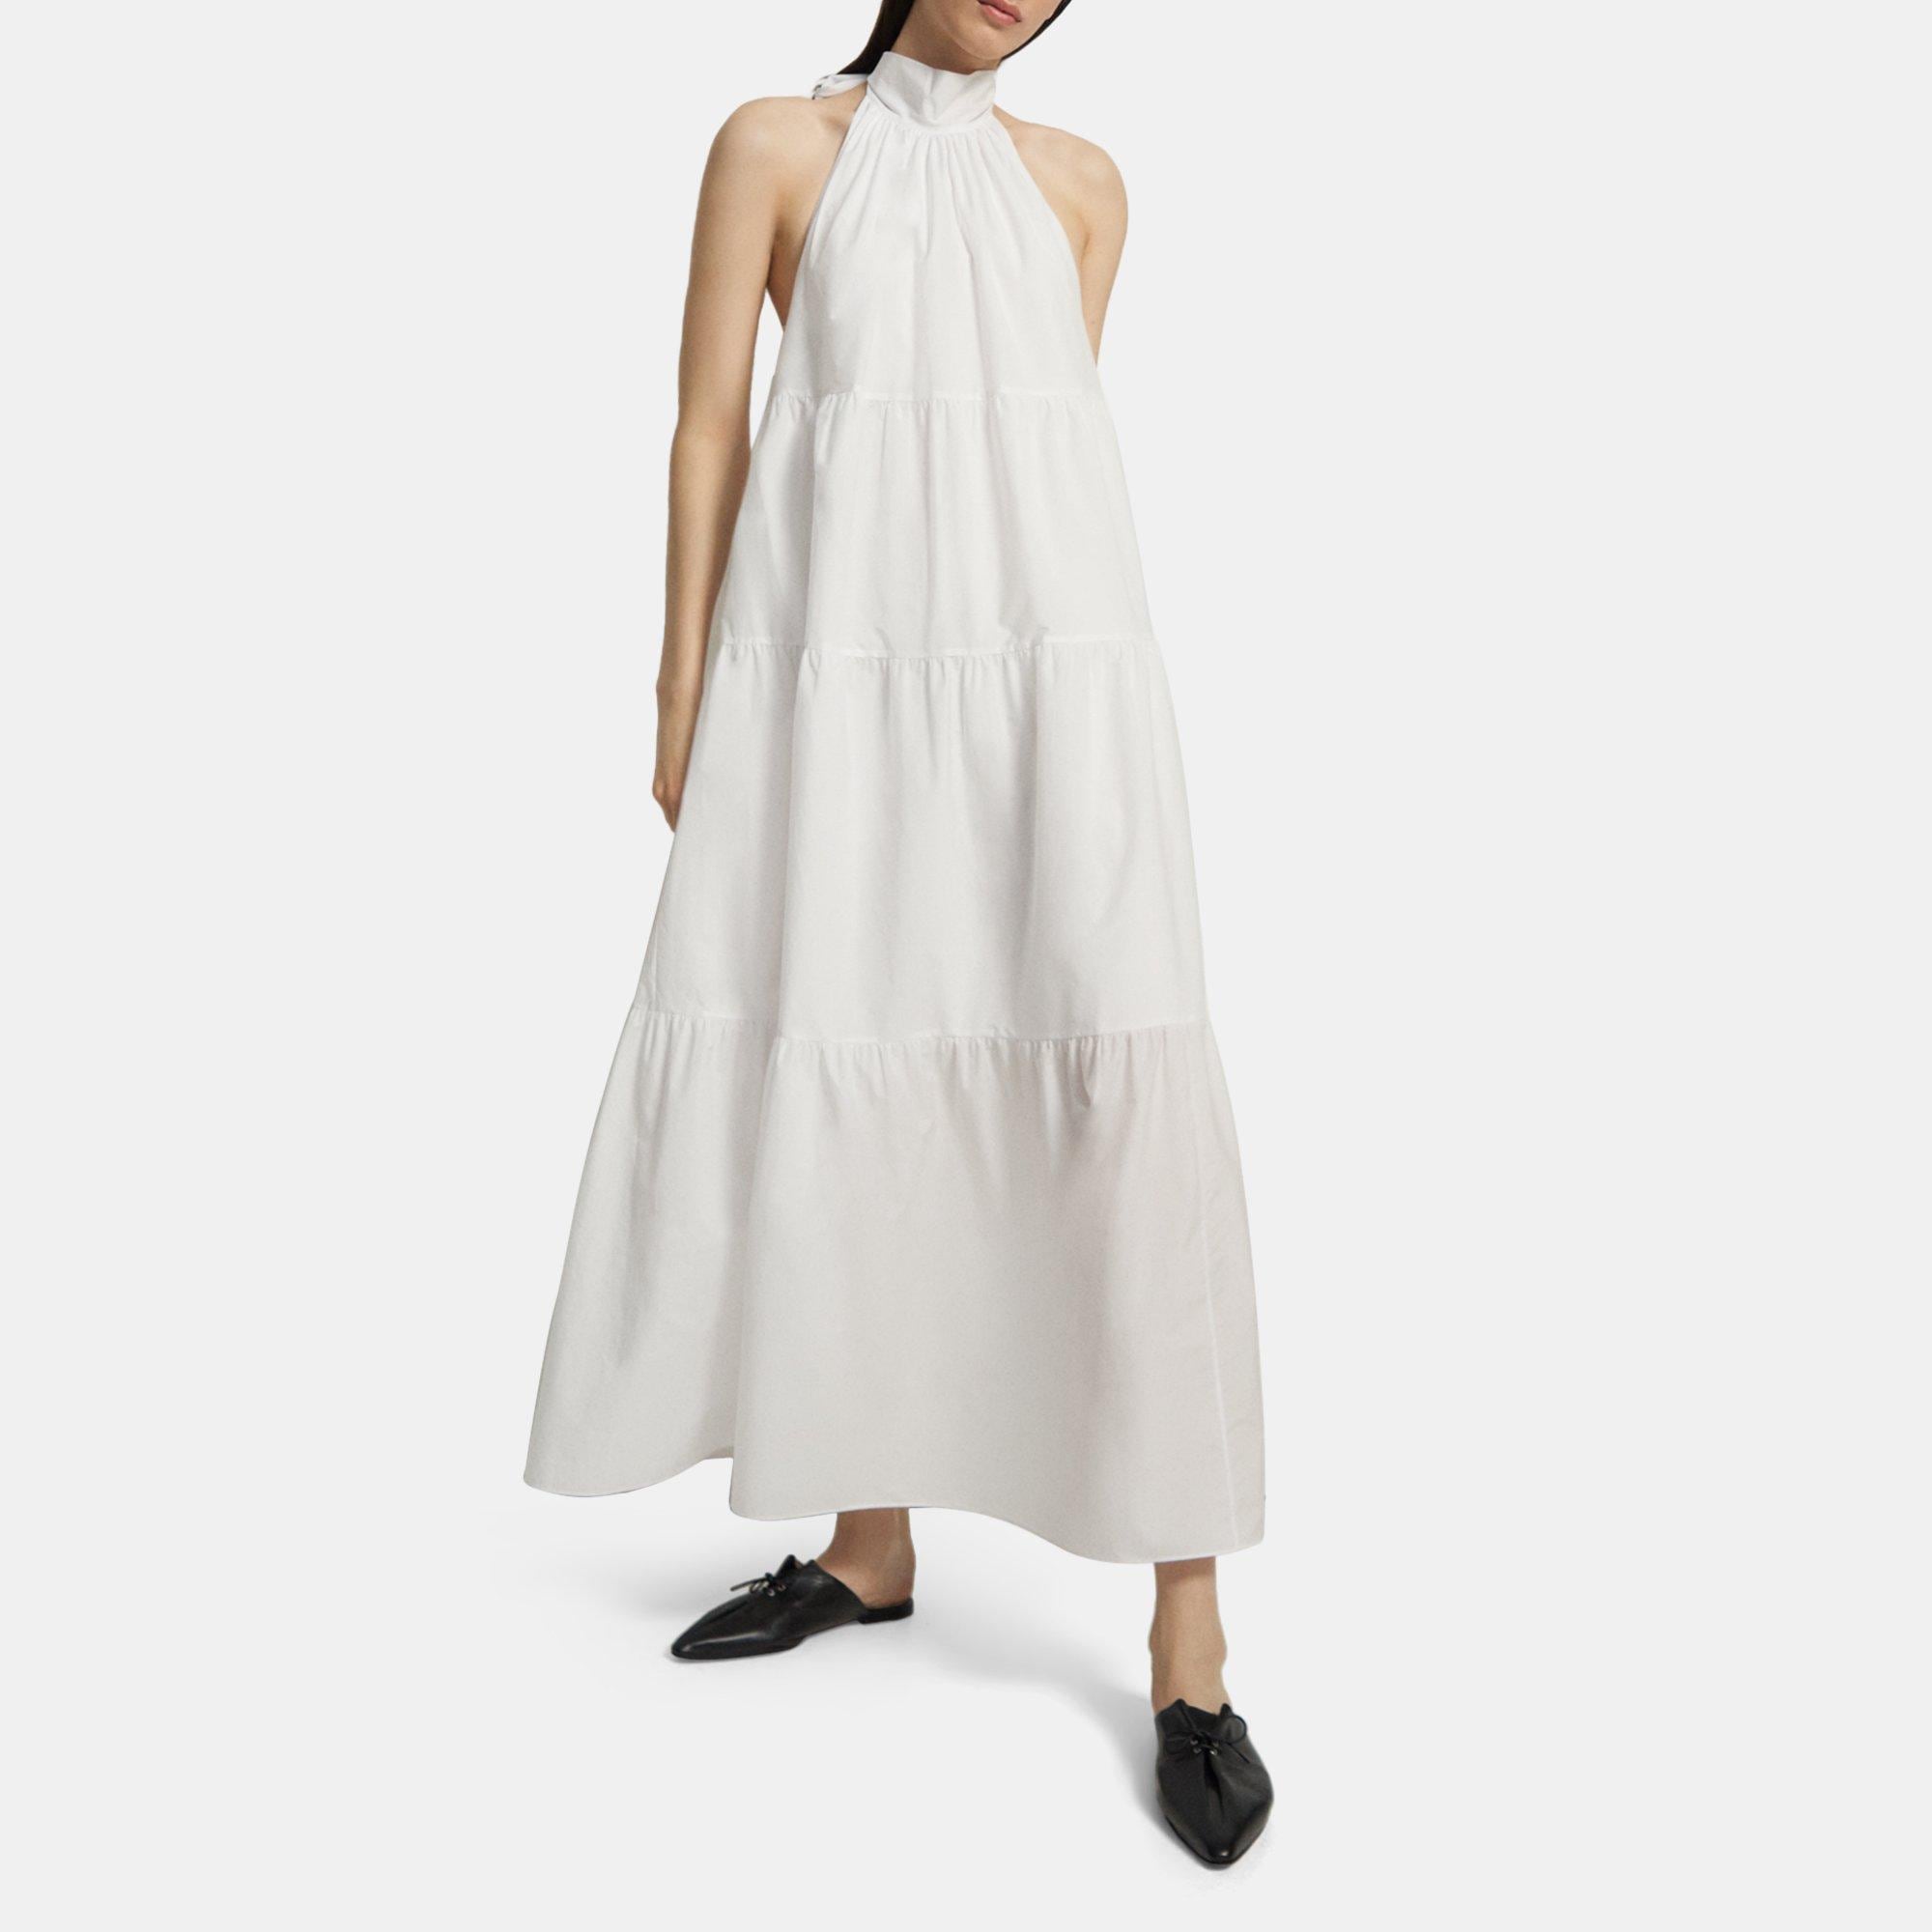 Theory Tiered Halter Maxi Dress in Cotton Blend